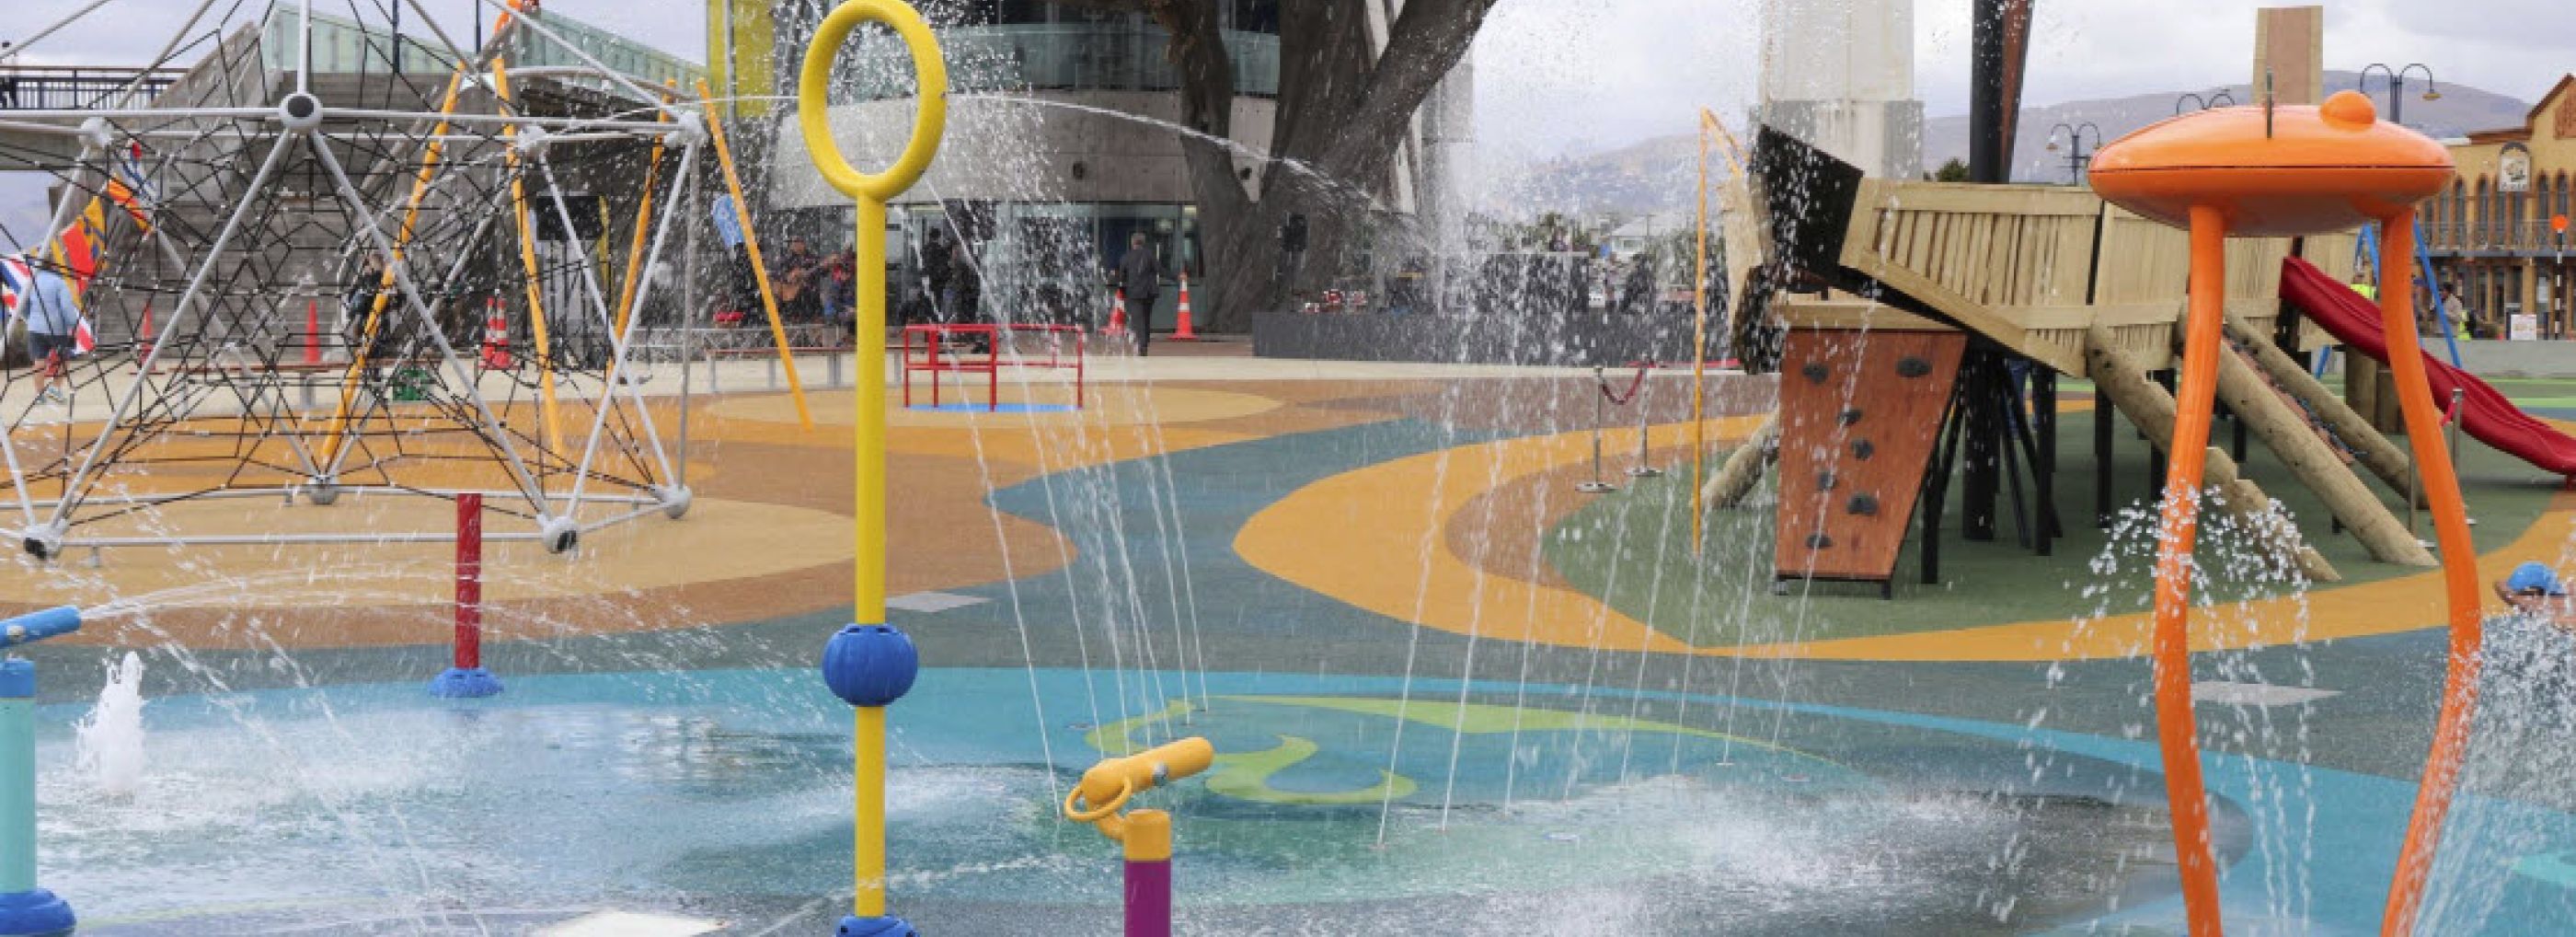 Outdoor water park with colourful rubber flooring.